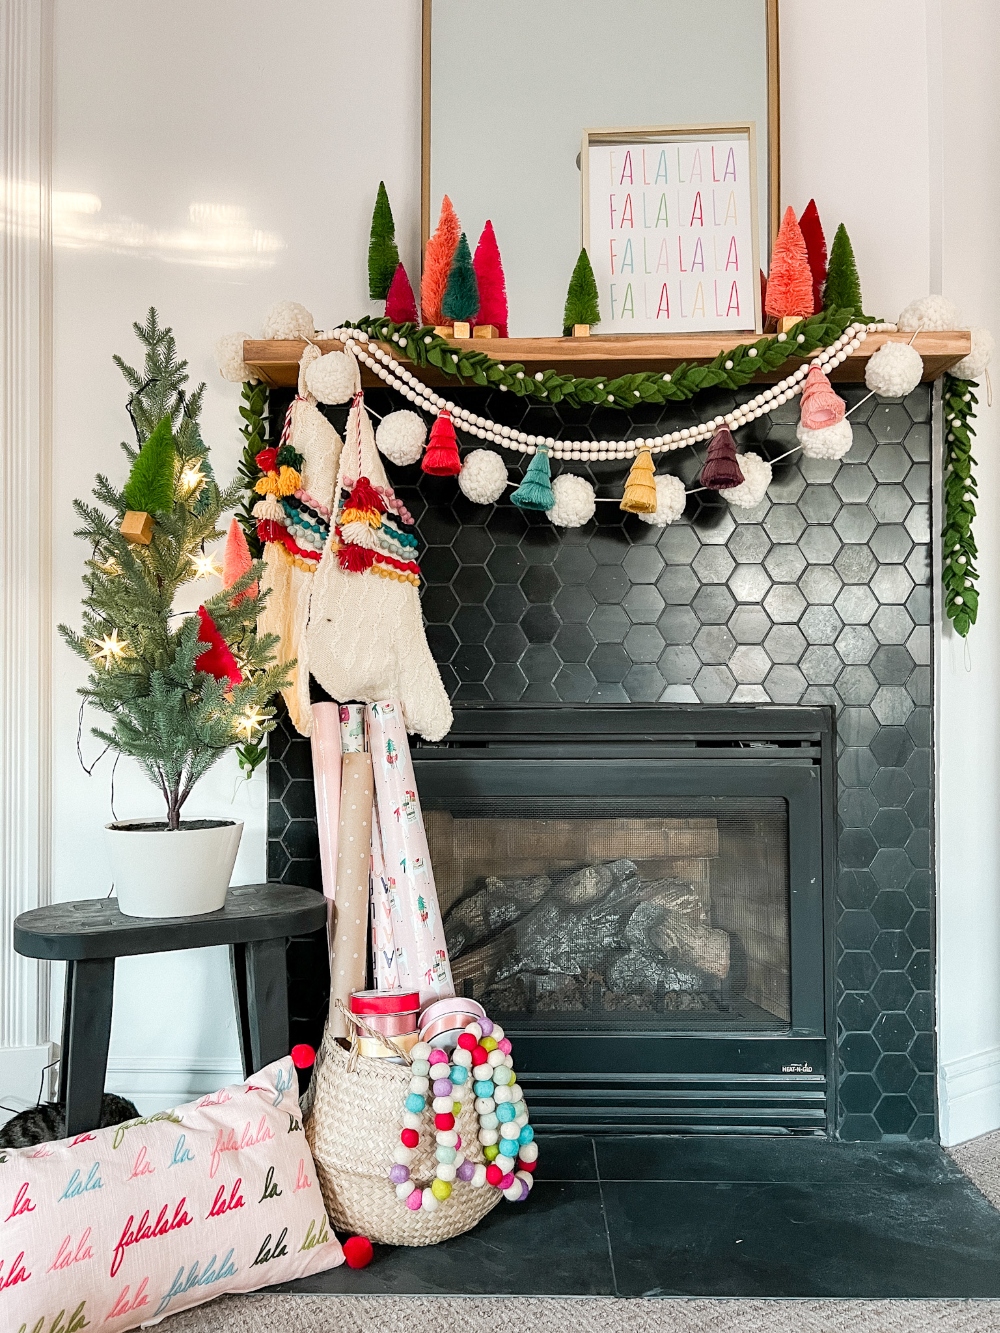 Colorful Holiday Bedroom Mantel. Add some holiday cheer to your bedroom with these colorful ideas!